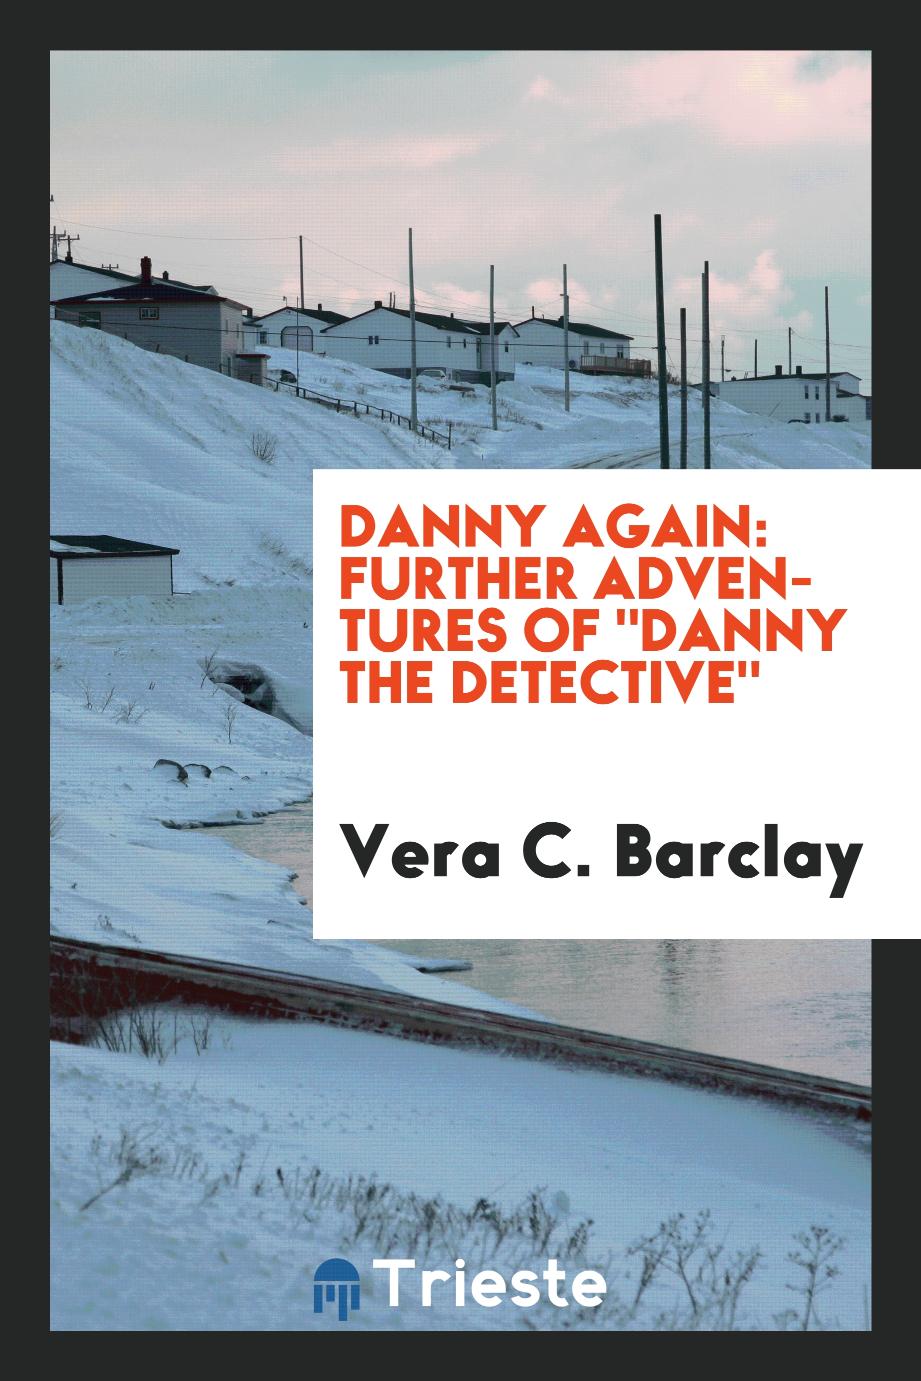 Danny again: Further adventures of "Danny the detective"